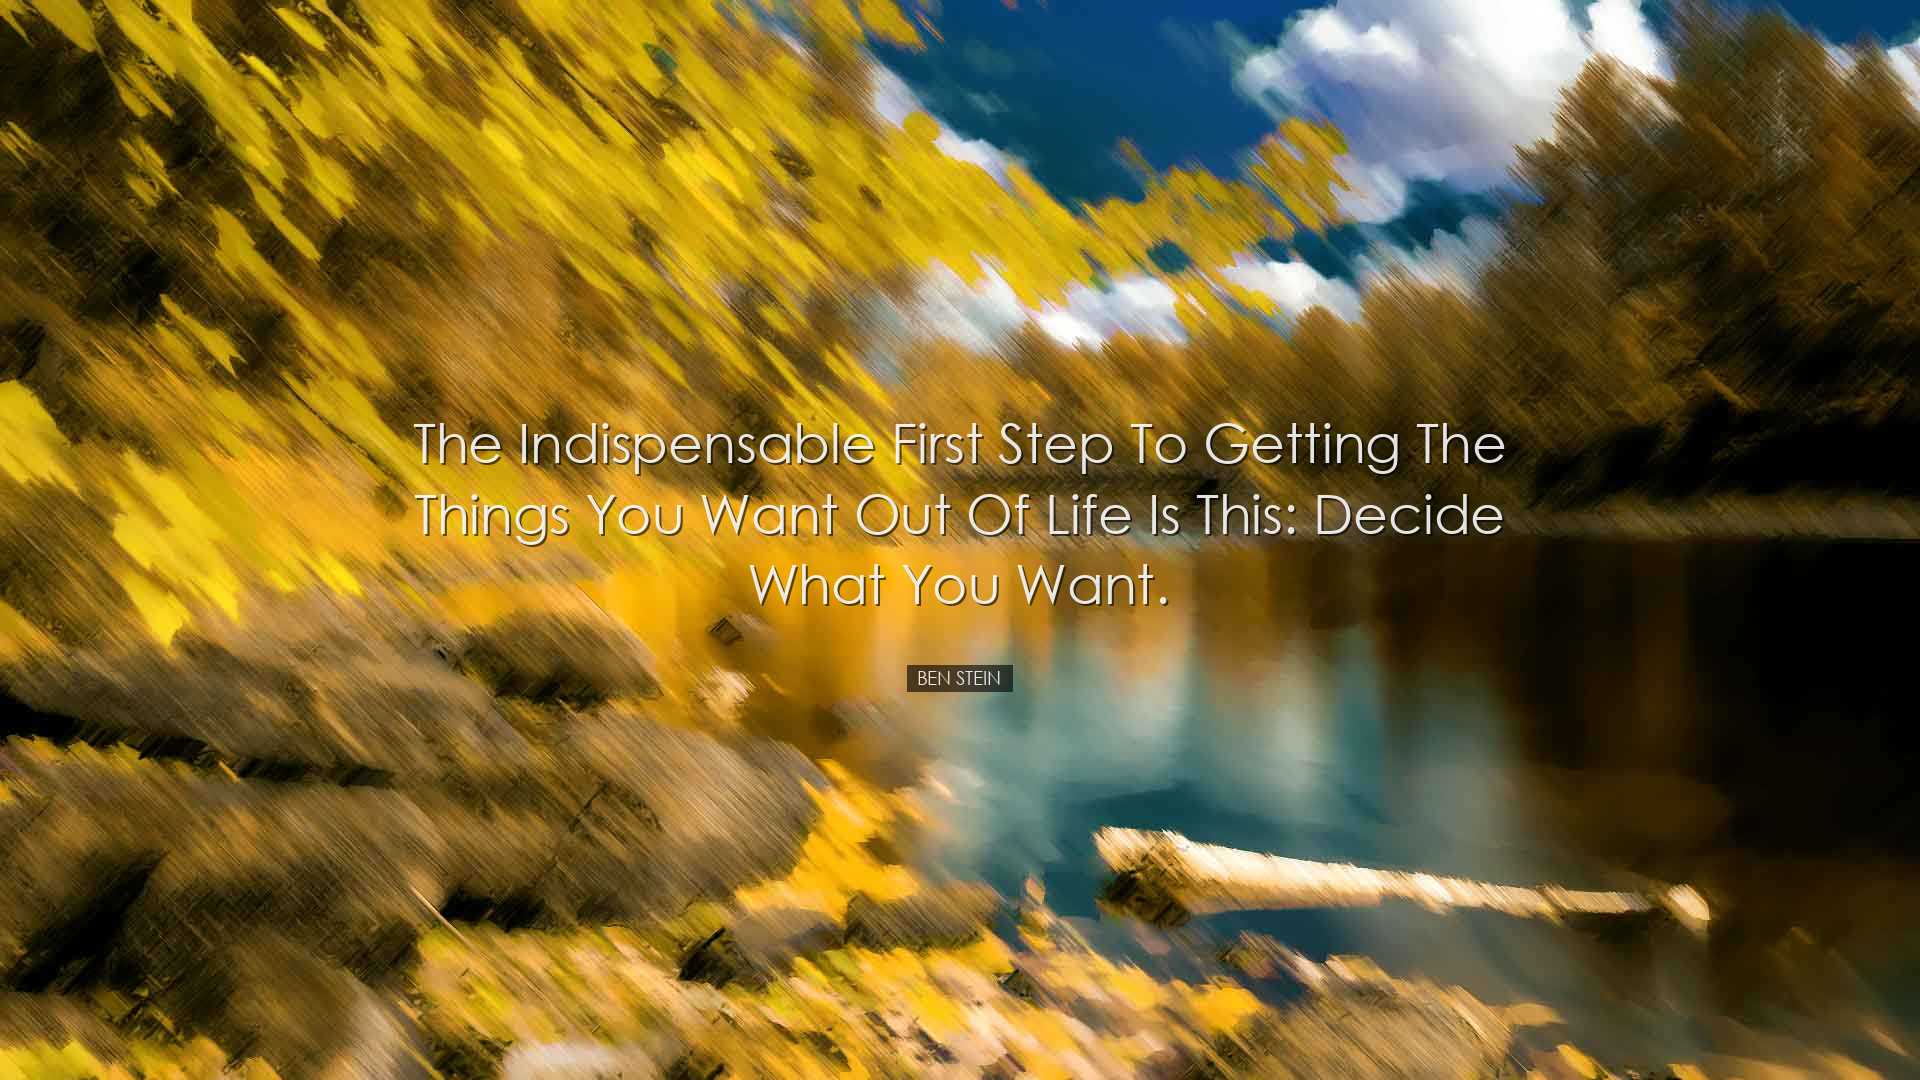 The indispensable first step to getting the things you want out of